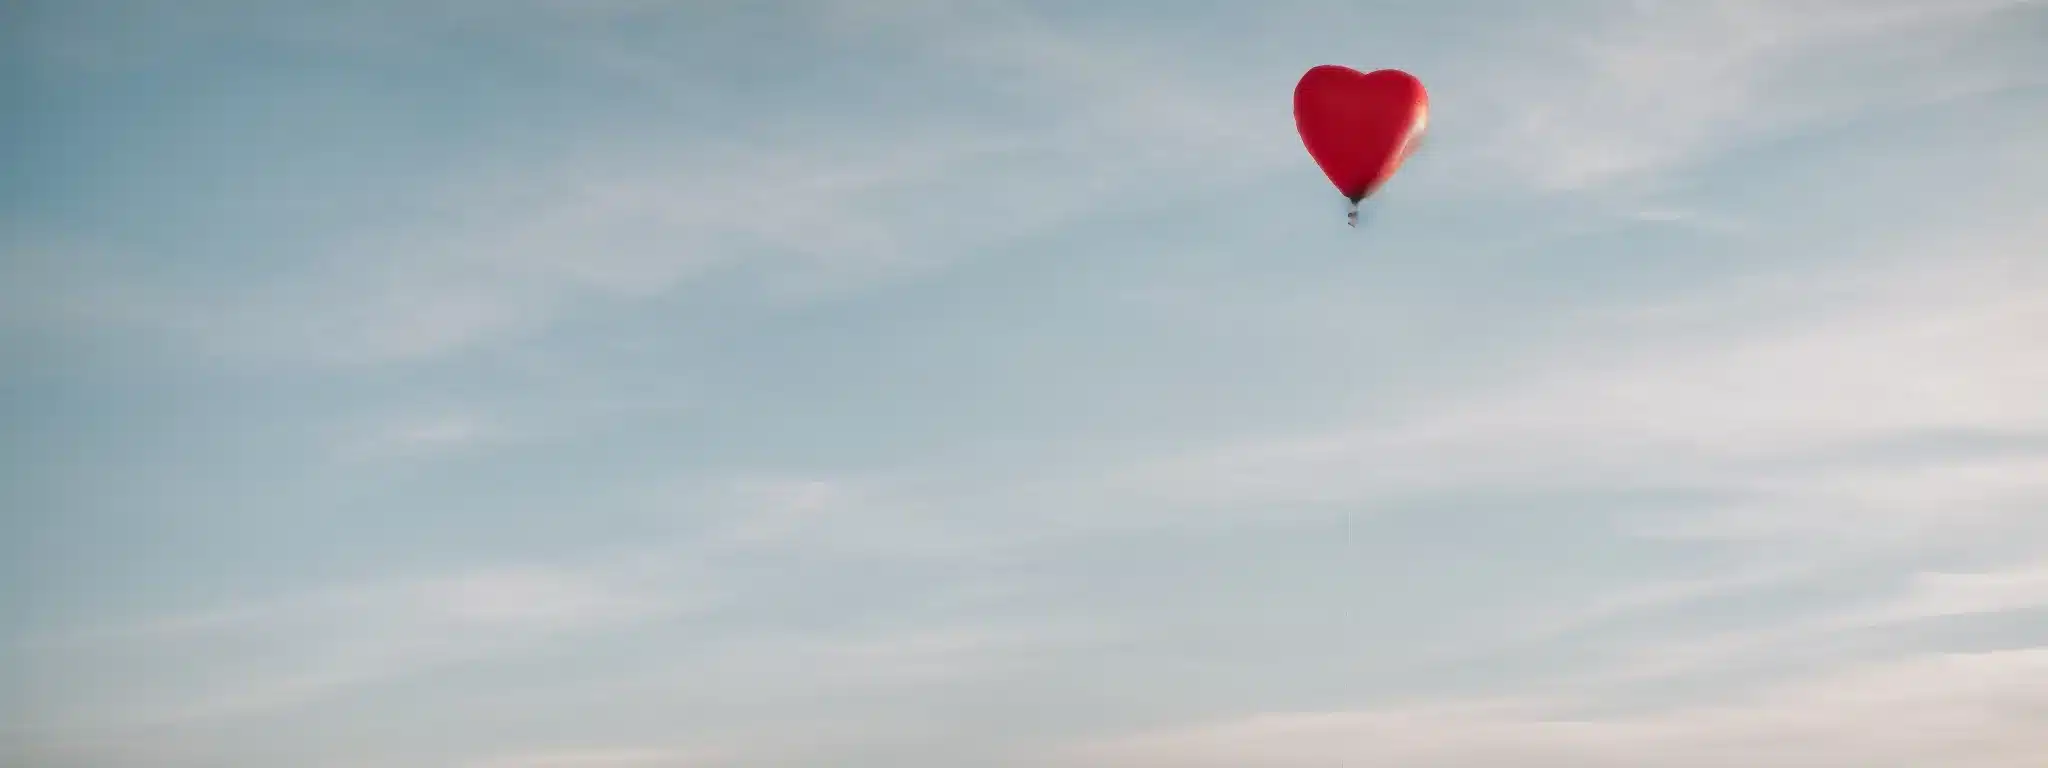 A Heart-Shaped Balloon Gently Floating Against A Serene Sky, Symbolizing The Lasting Emotional Connection Between Brand And Consumer.